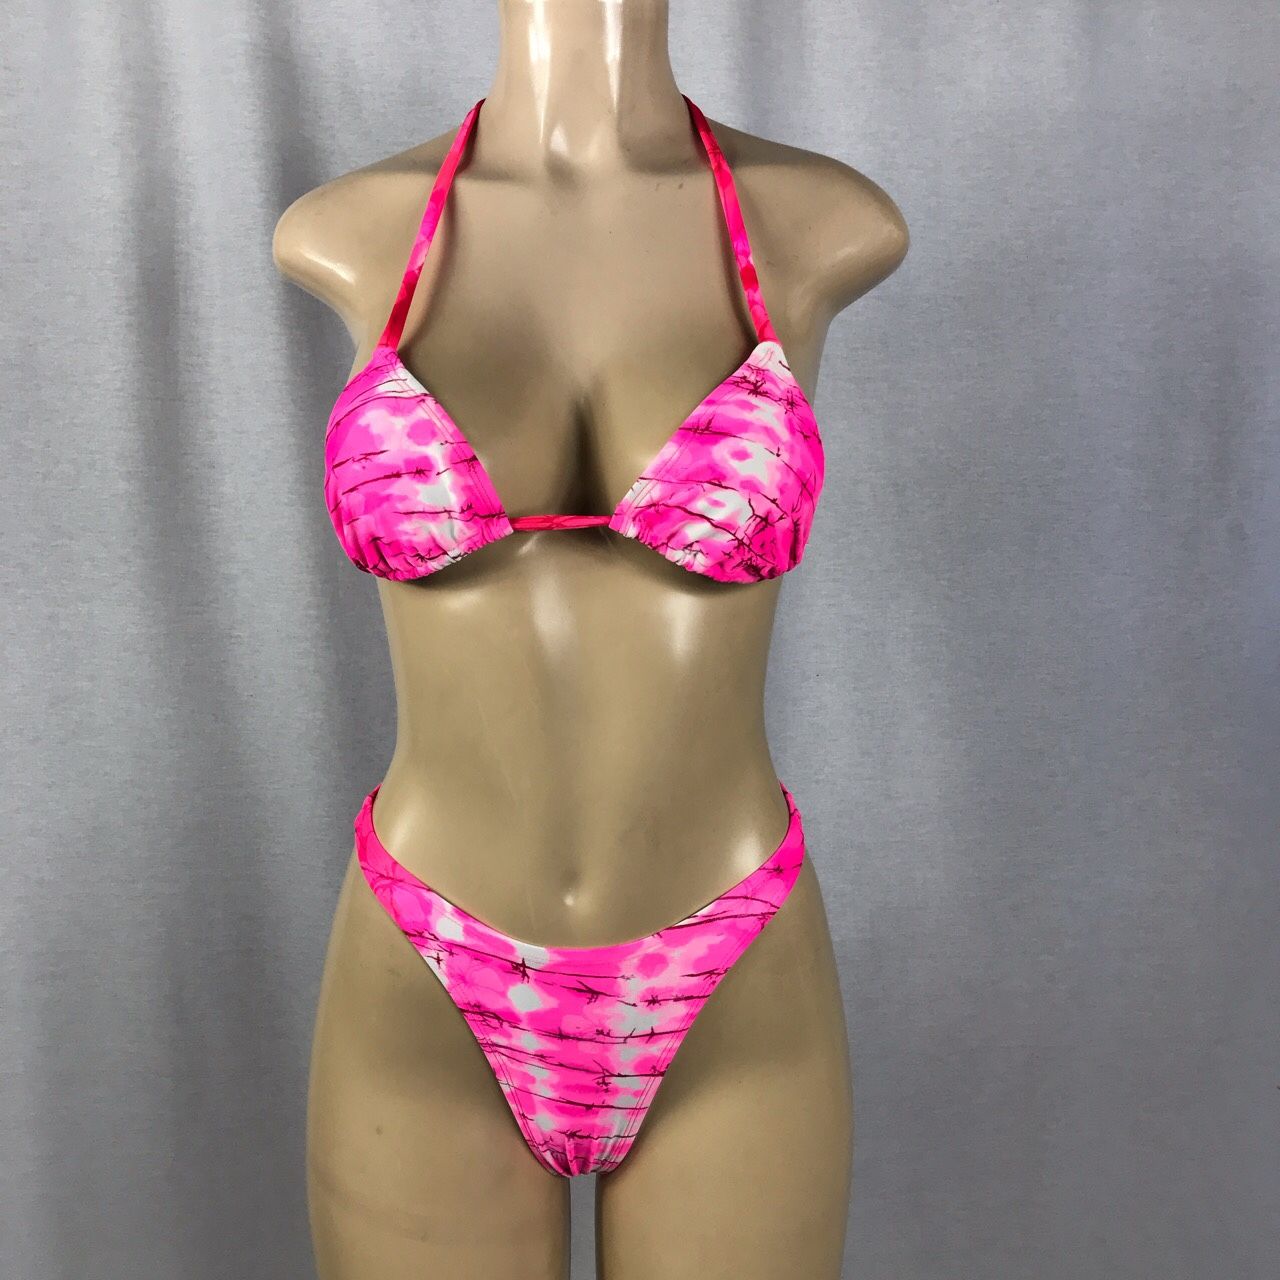 Zuliana Hot and Sexy bright pink 🌺 floral print High Waist Brazilian Cut Bikini” sooo hot 🔥 and sexy. Made in the 🇺🇸 USA. This is a unique sexy 👙